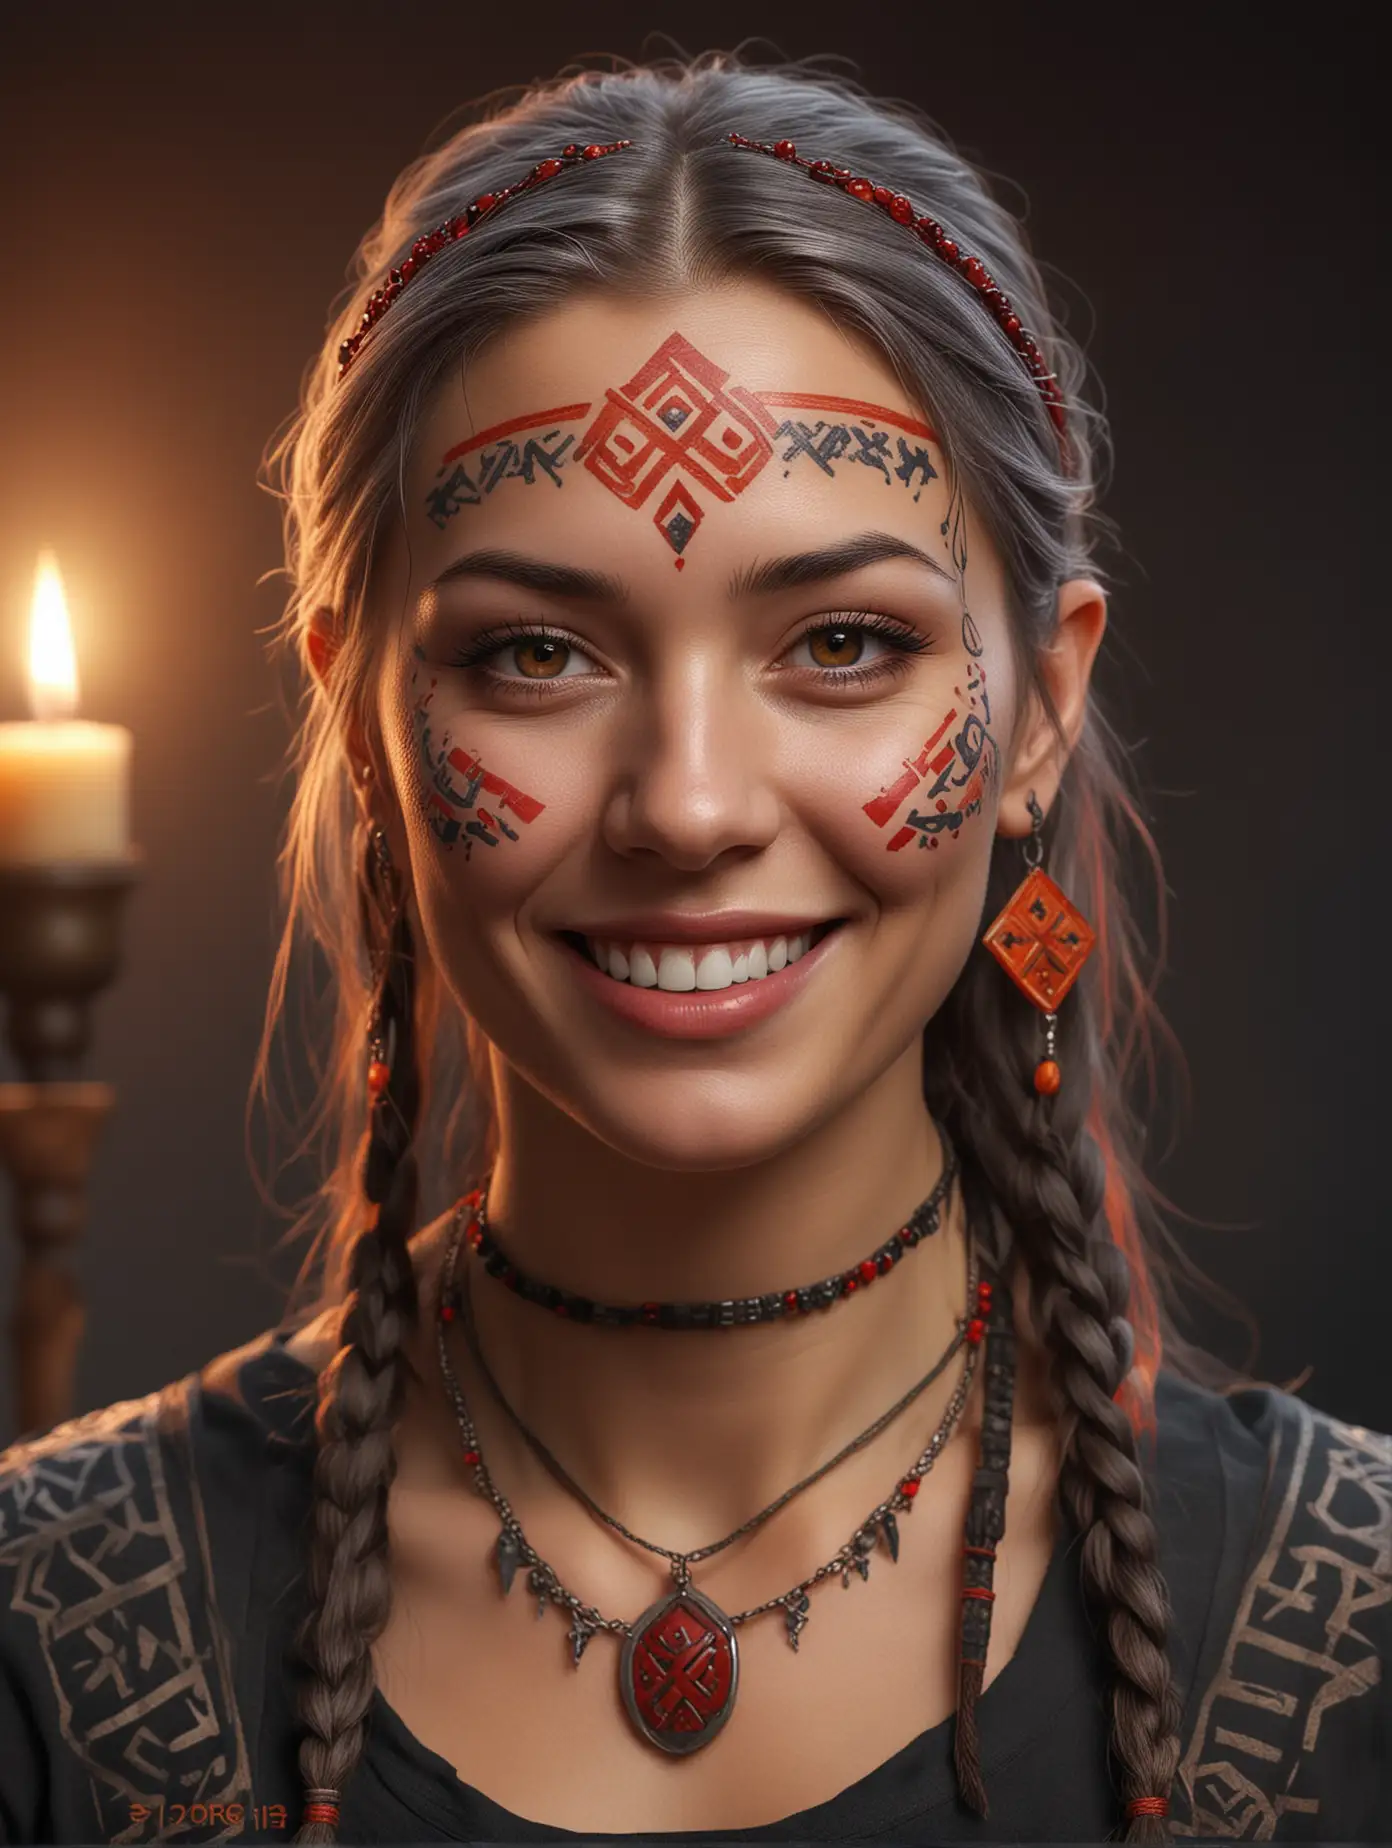 Smiling-Nordic-Shaman-with-Runic-Tattoos-and-Forge-Workshop-Background